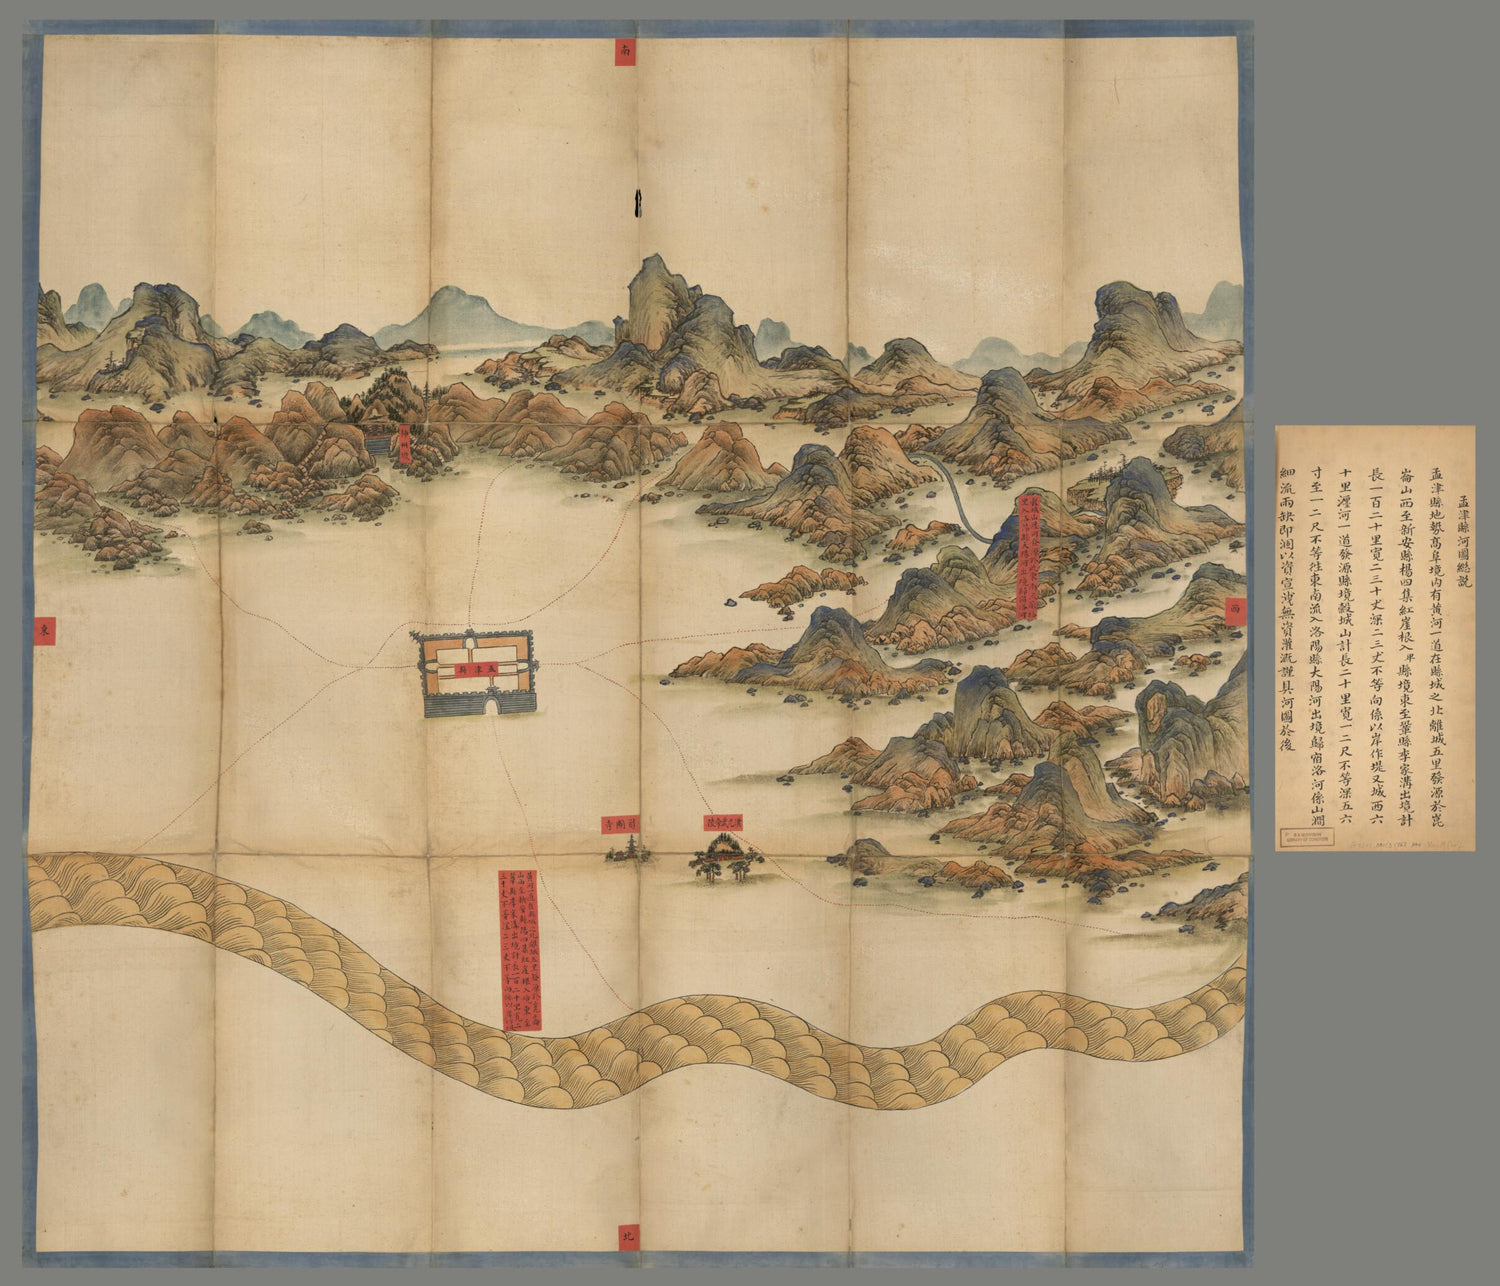 This old map of Mengjin Xian He Tu. (孟津縣河圖, Map of the River Systems In Mengjin County) from 1734 was created by Arthur W. (Arthur William) Hummel in 1734